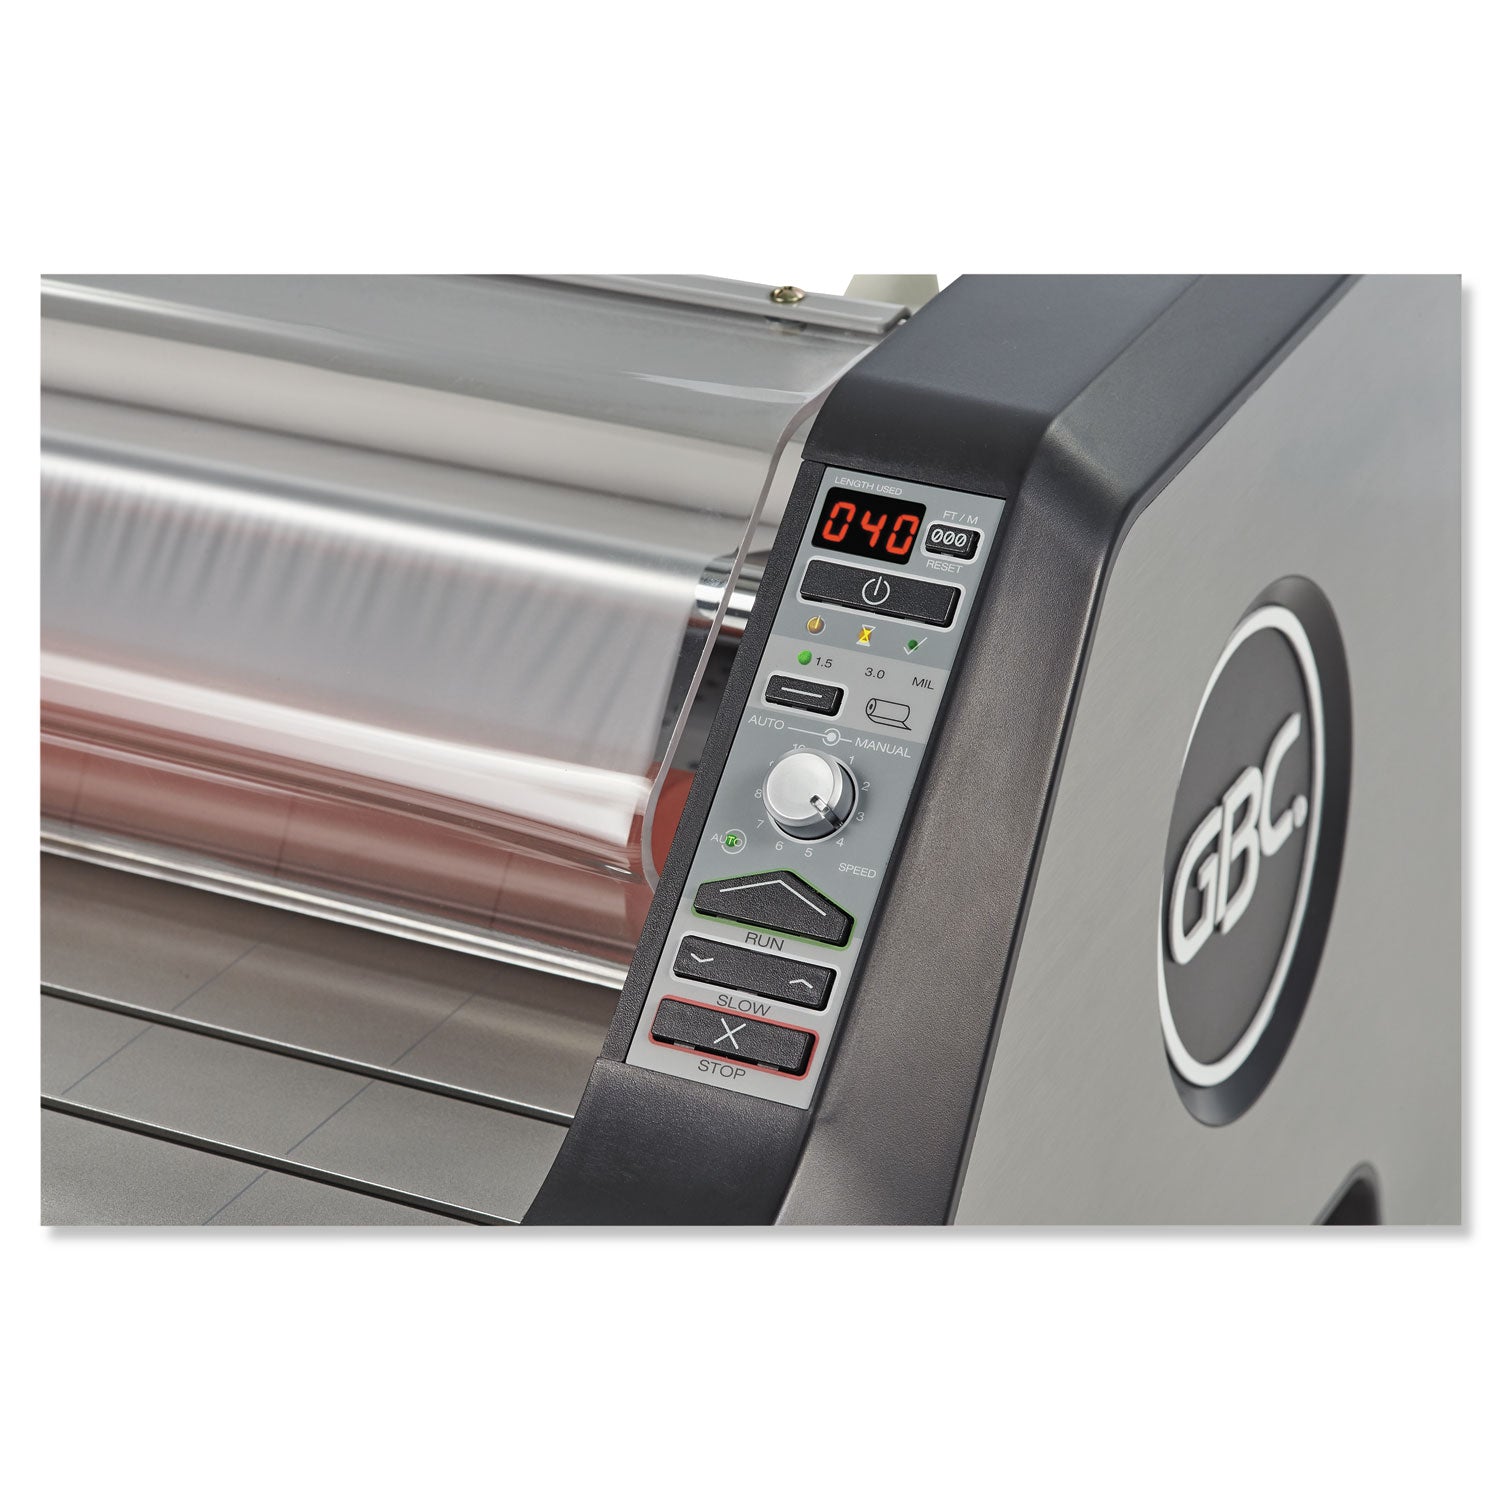 Ultima 65 Thermal Roll Laminator, 27" Max Document Width, 3 mil Max Document Thickness - 